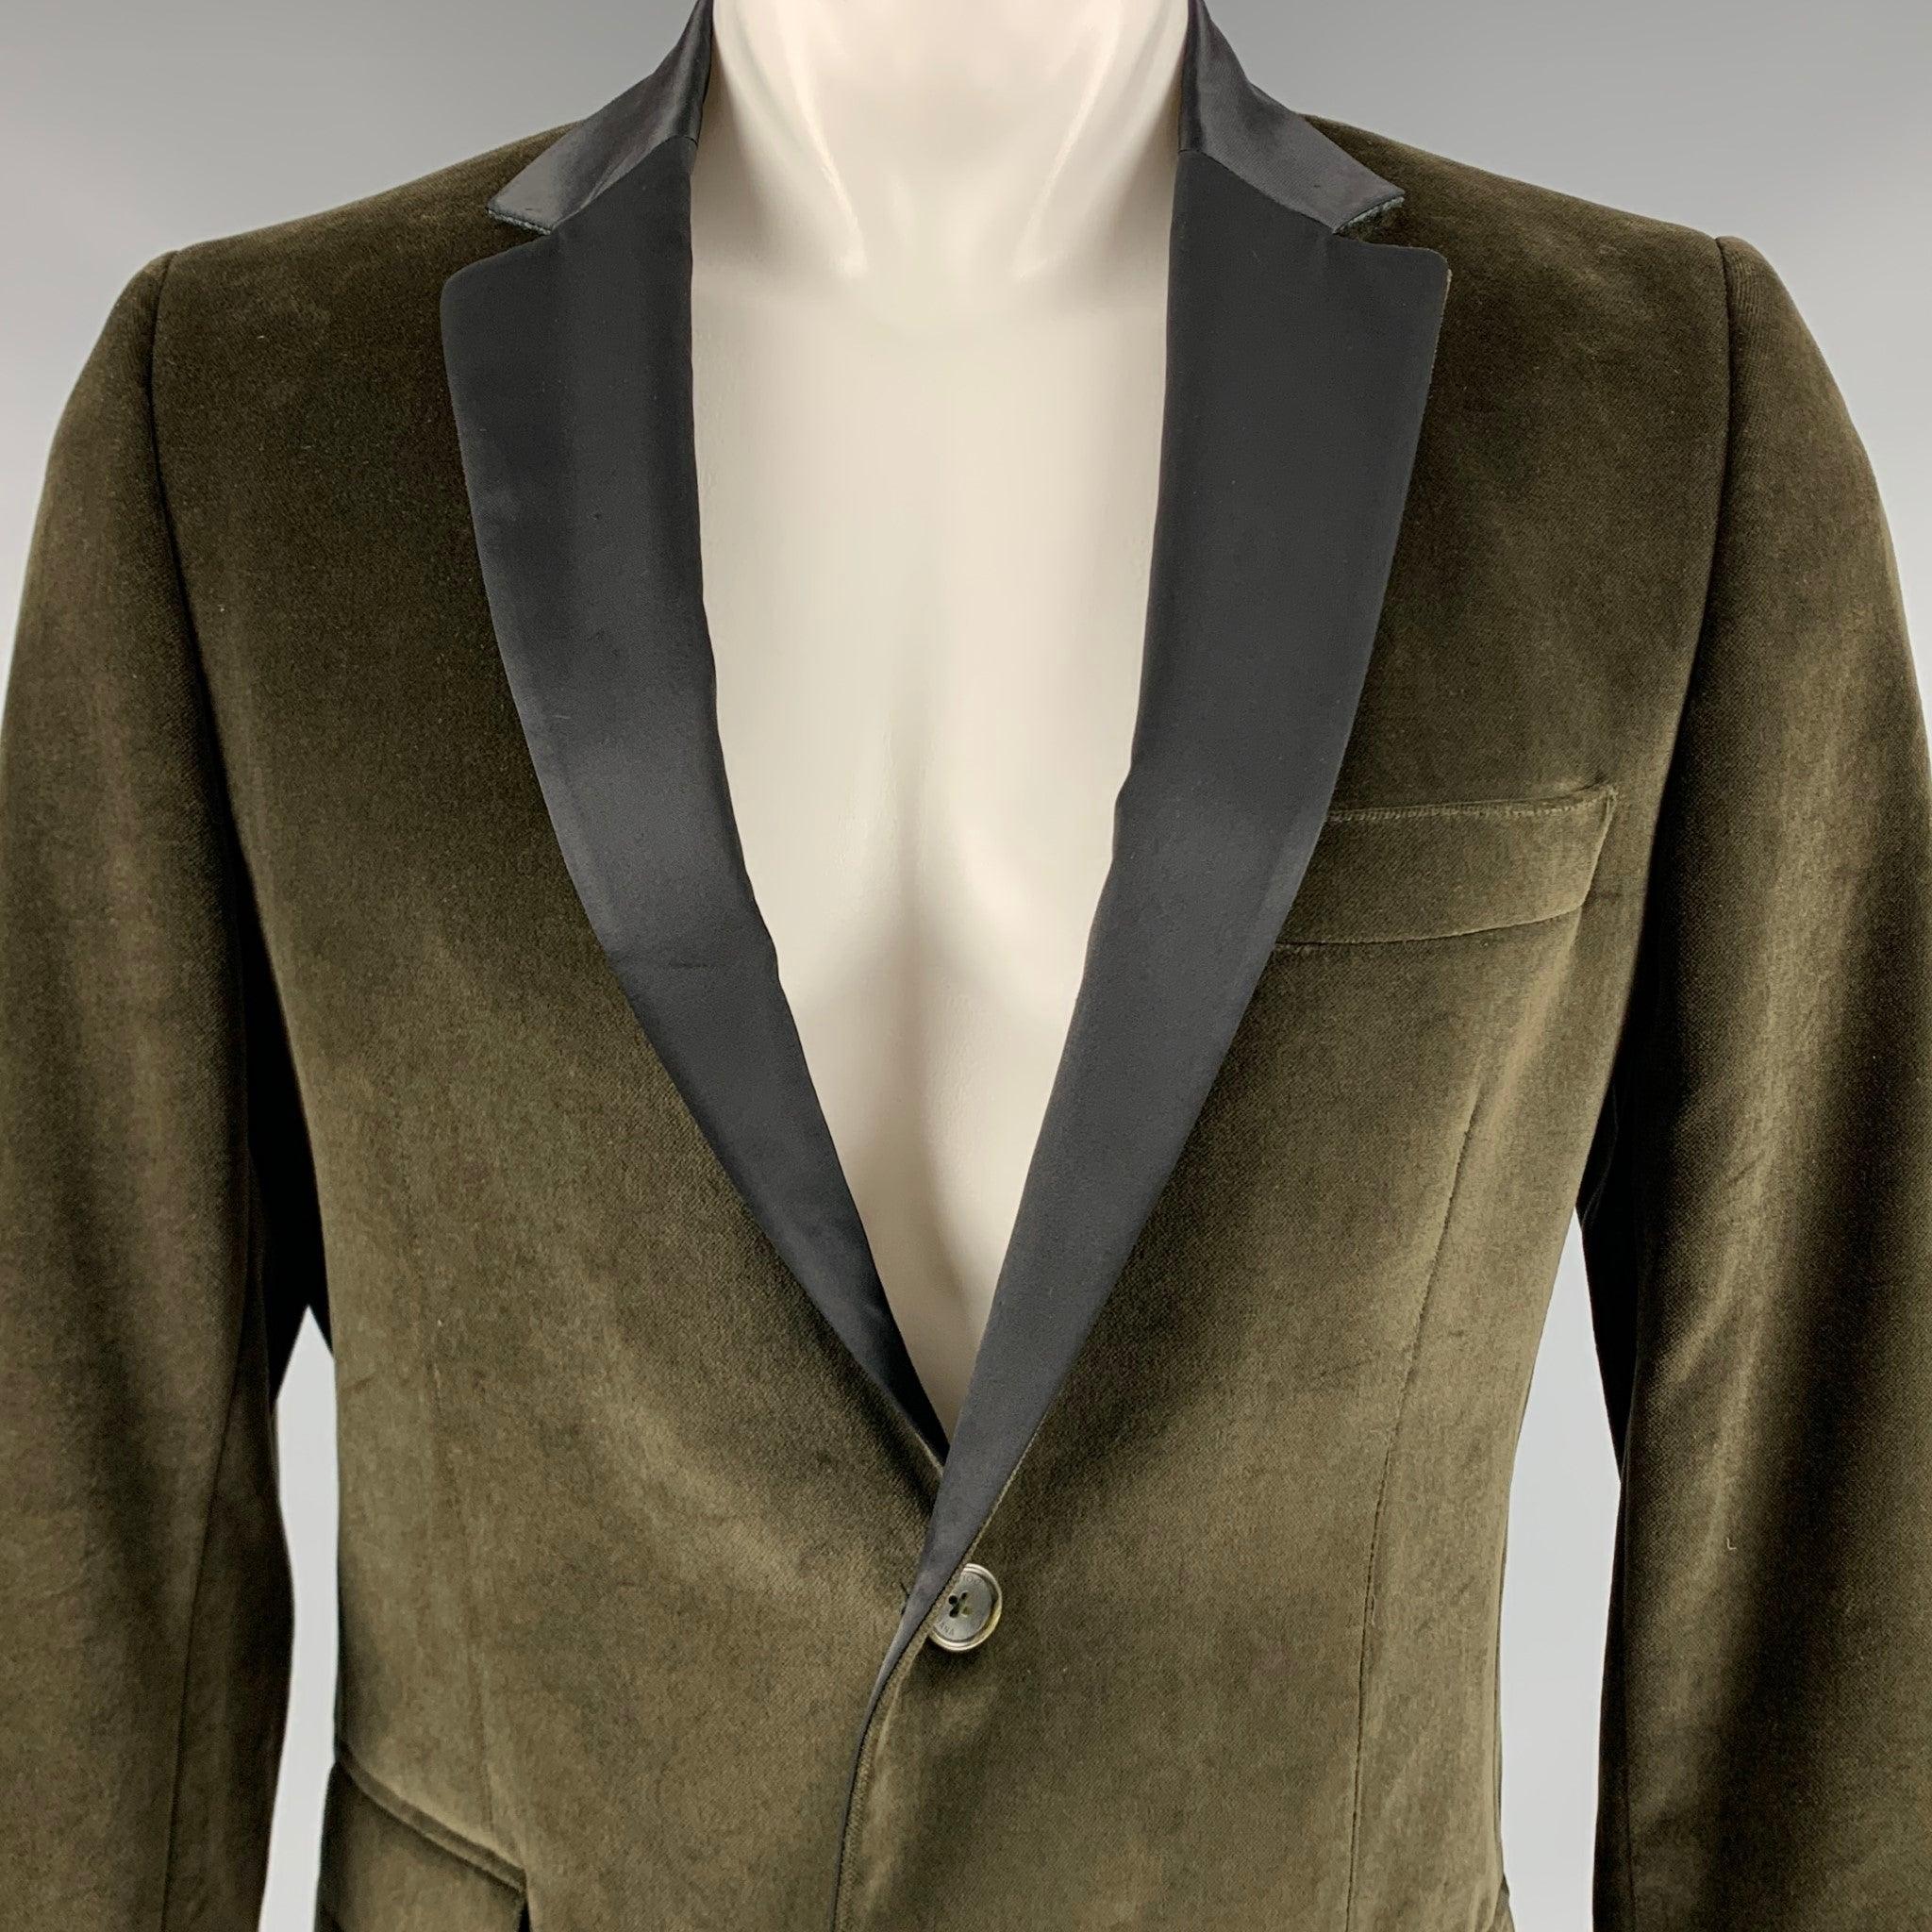 D&G by DOLCE & GABBANA sport coat
in an olive green cotton velvet featuring contrasting black notch lapel, single vented back, and double button closure. Made in Italy.Very Good Pre-Owned Condition. Minor signs of wear. 

Marked:   34/48